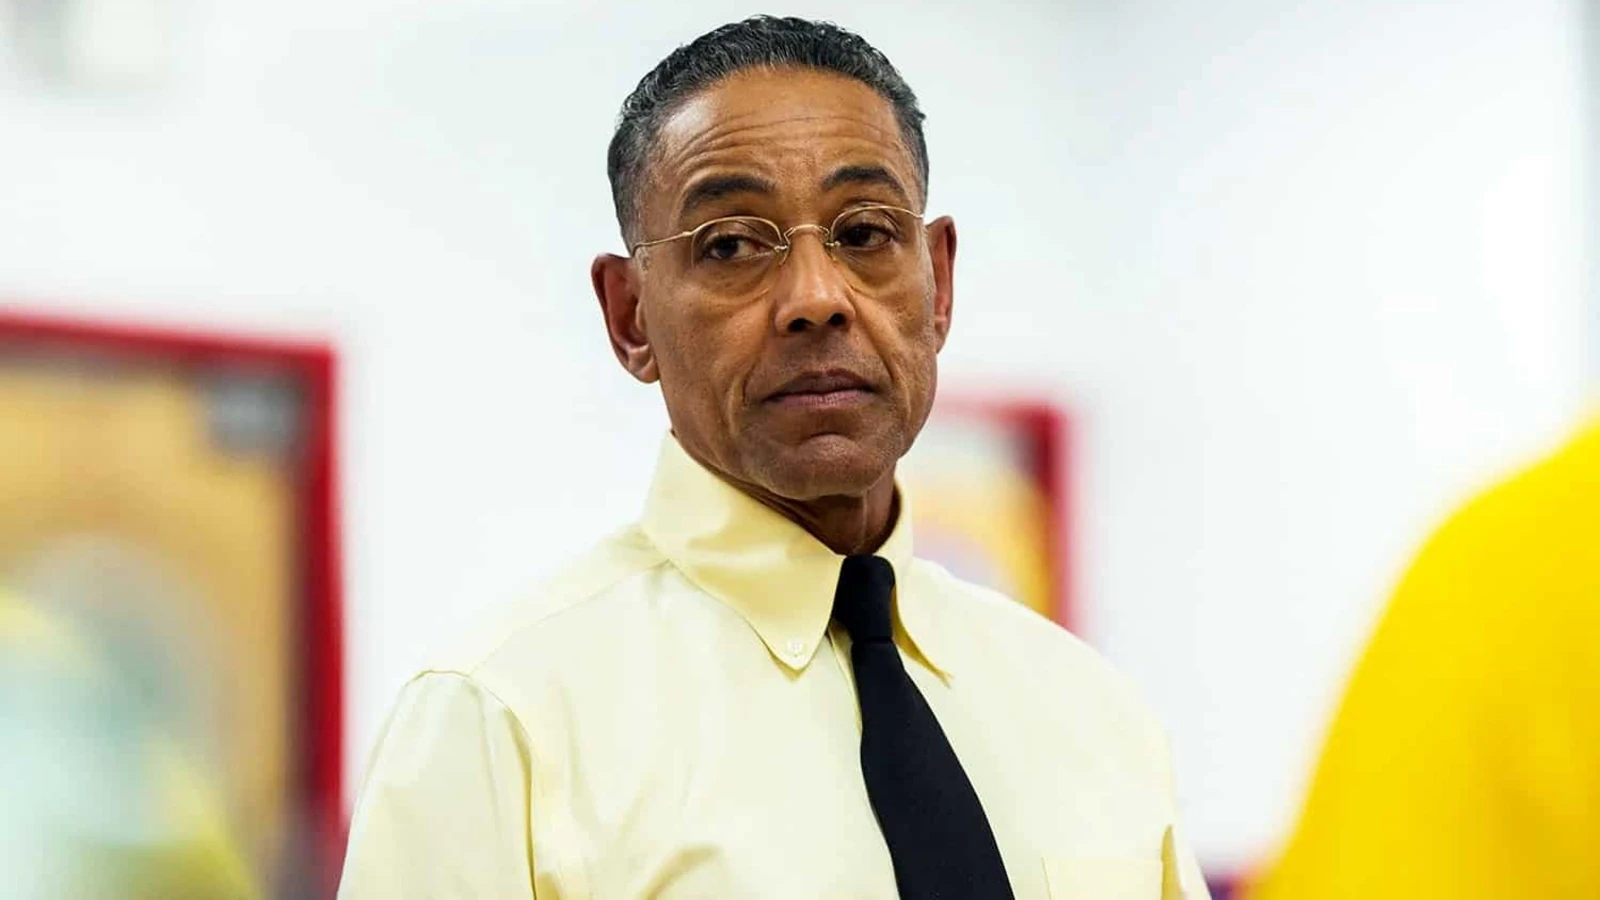 Breaking News: 'Breaking Bad' Star Giancarlo Esposito Shocks Fans with Unexpected Marvel Role